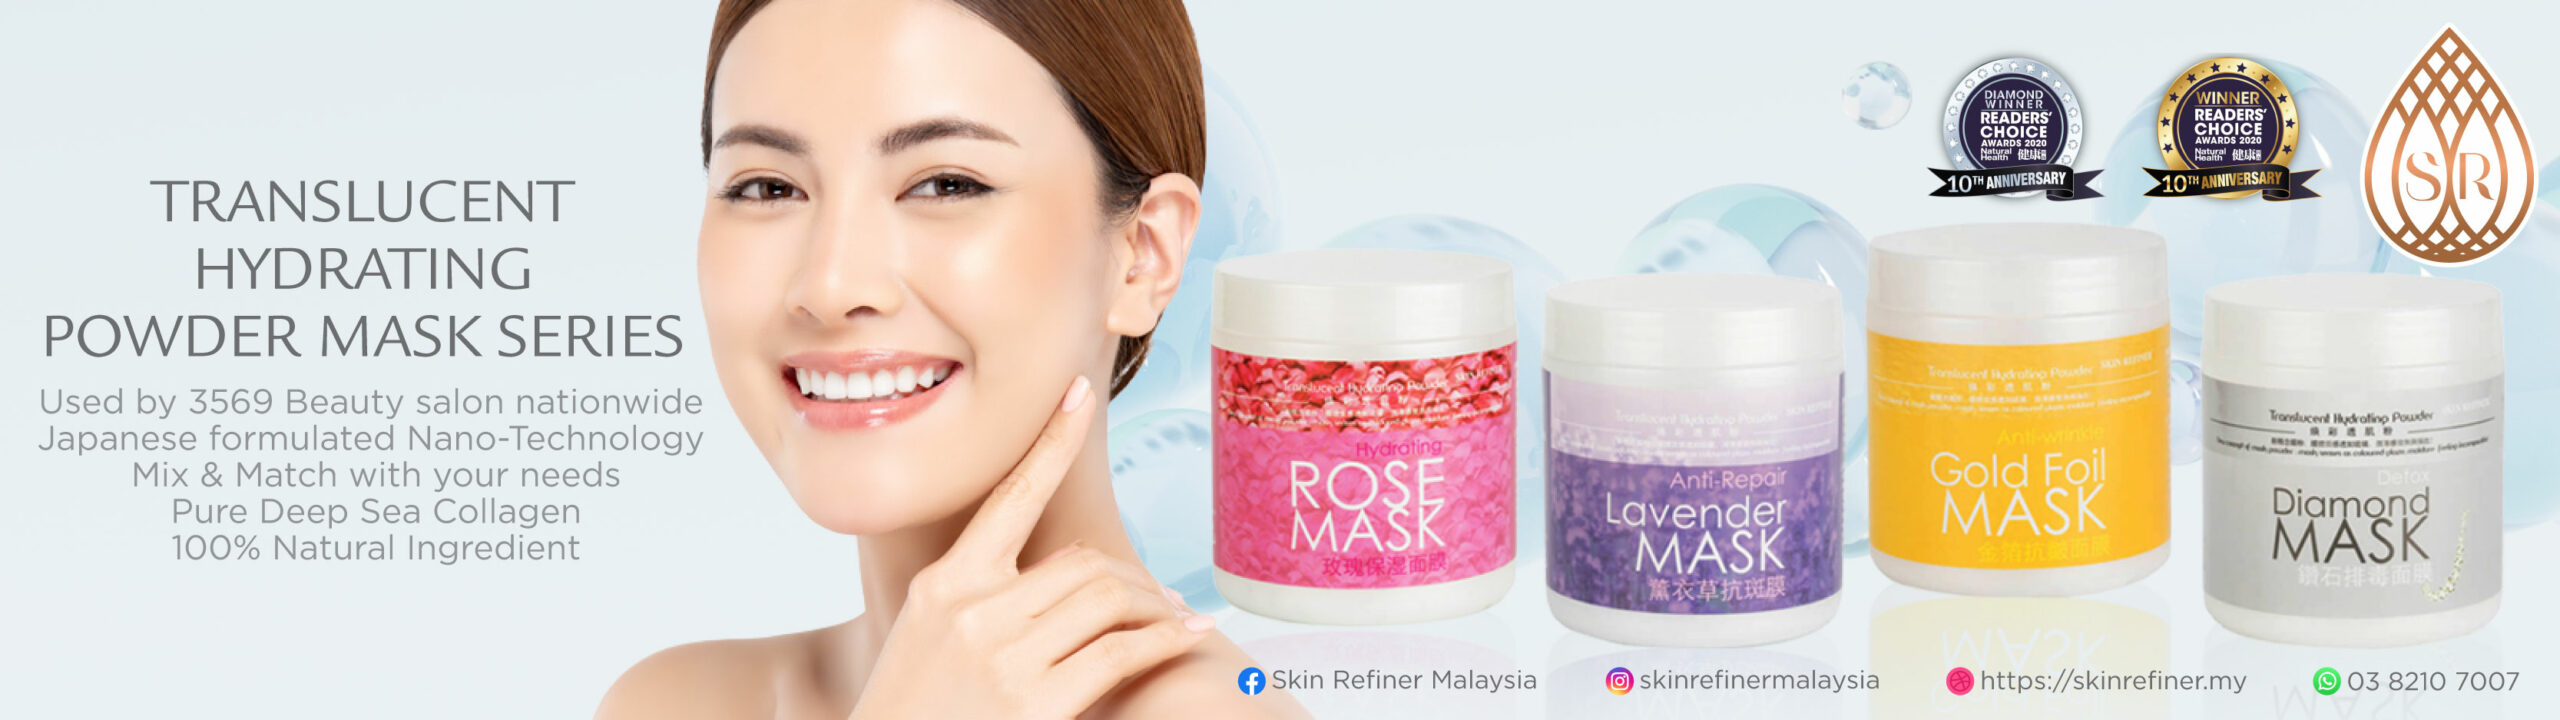 Experience Salon-quality Facial Cleansing with Skin Refiner Translucent Hydrating Powder Mask